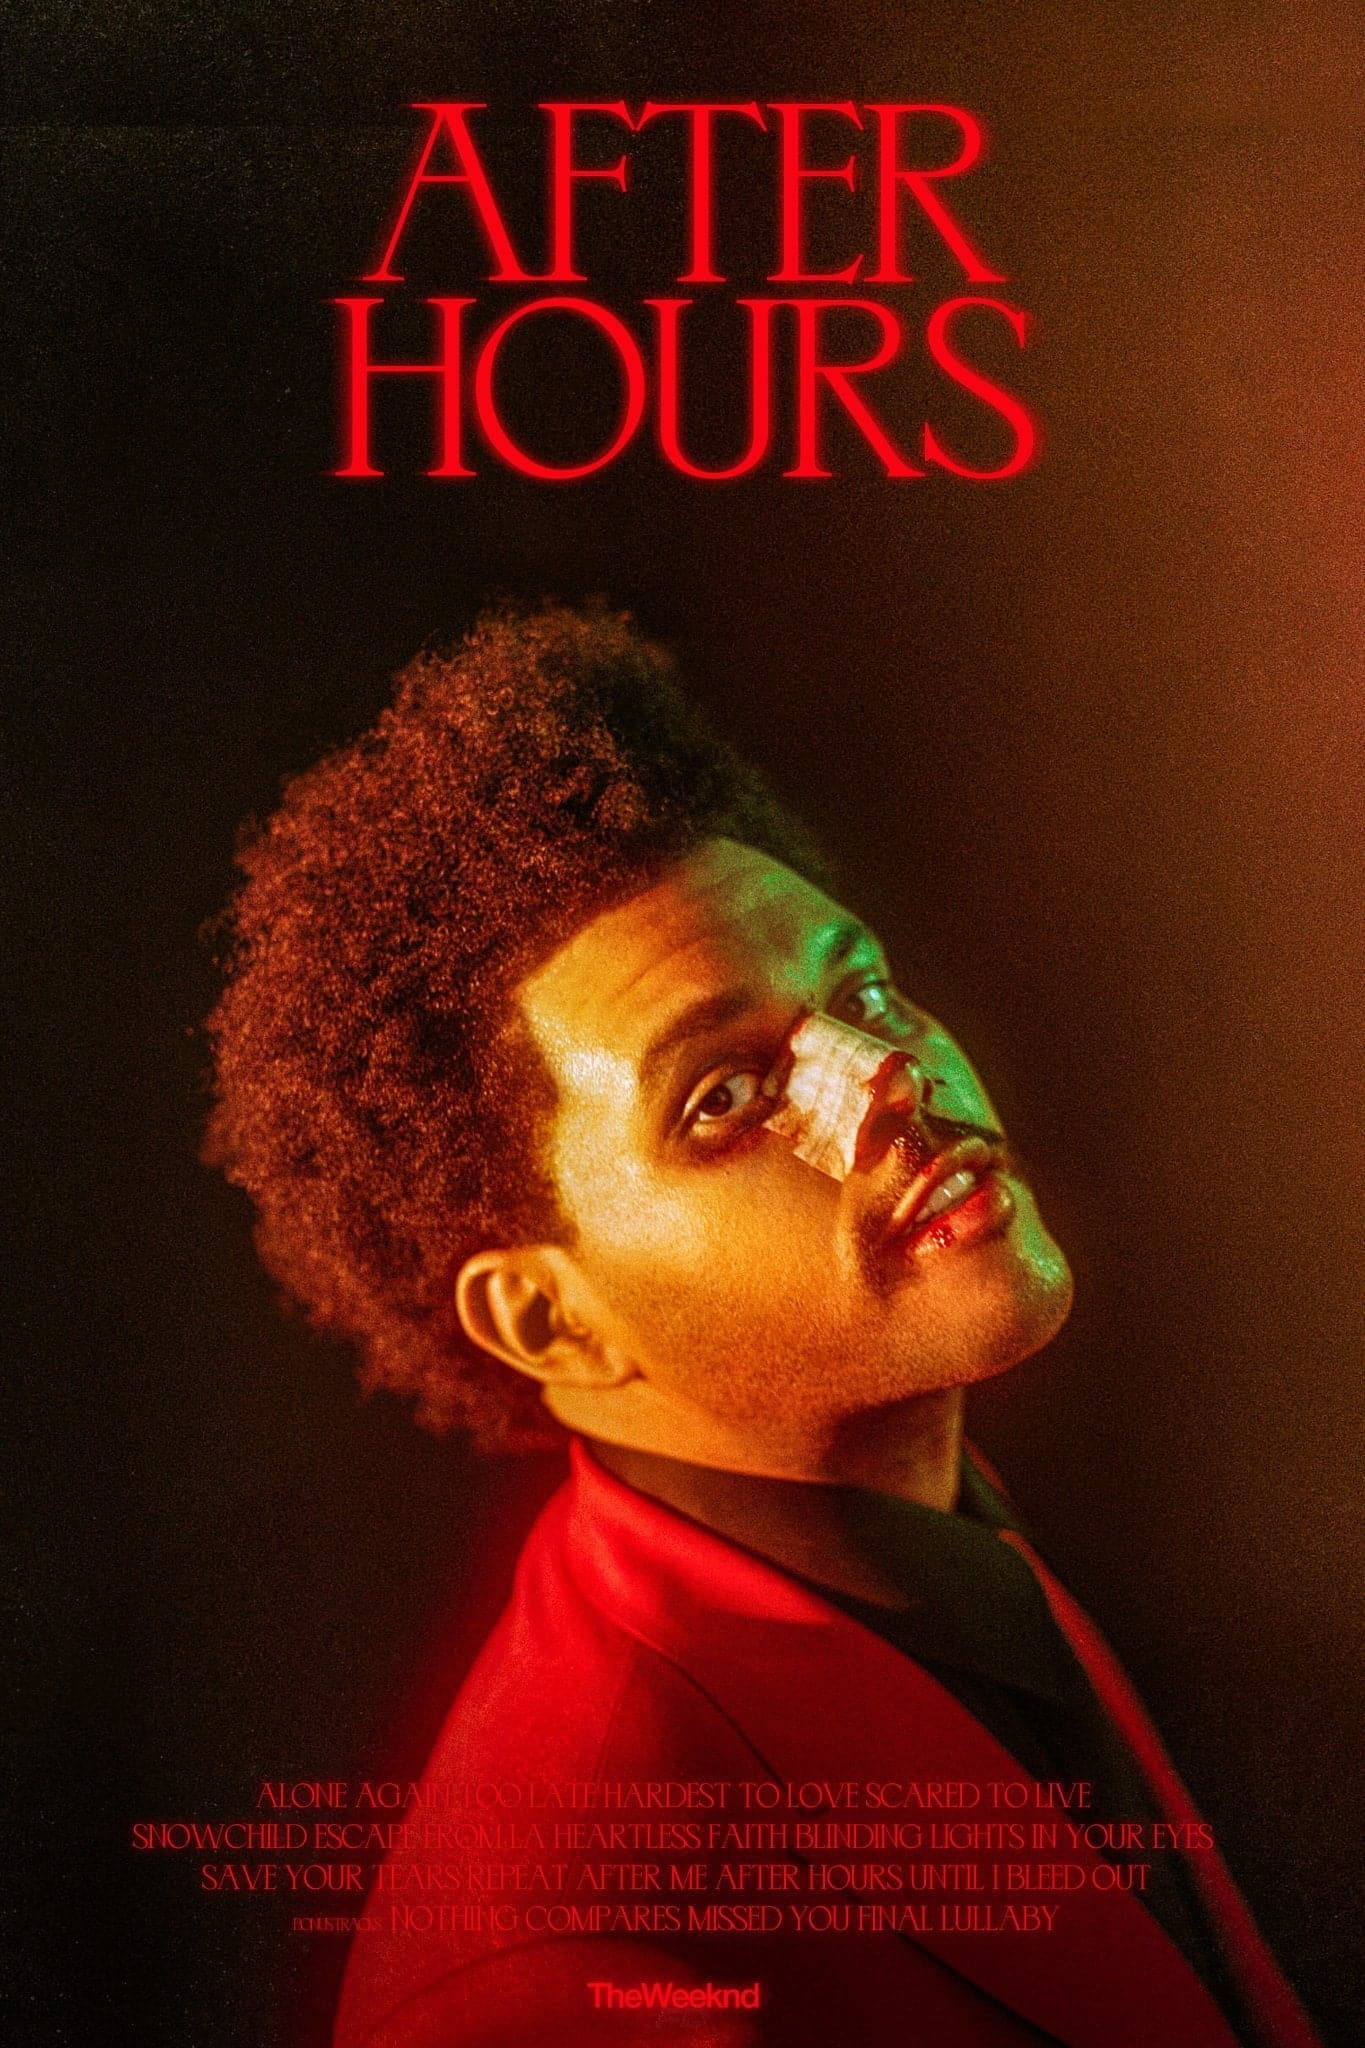 The Weeknd Poster After Hours – Wallister - Poster & More